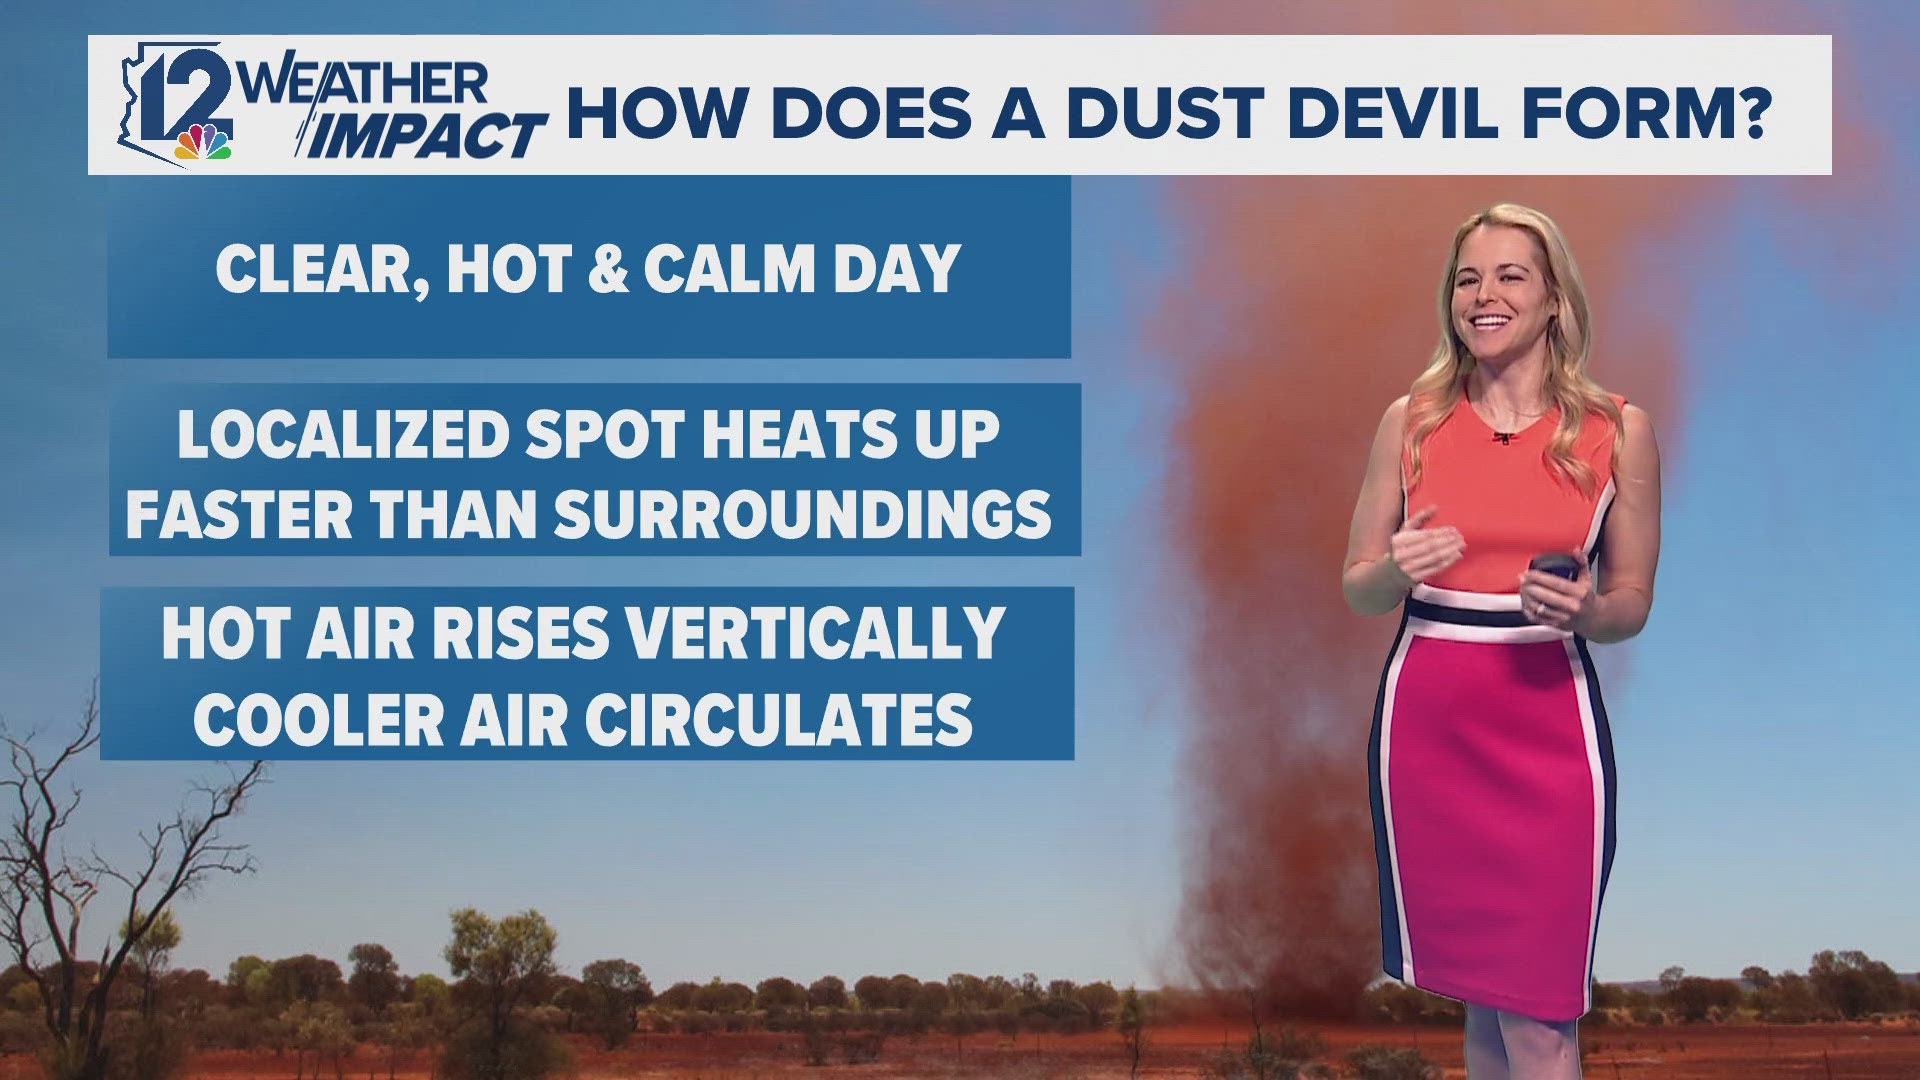 Dust devils are rotating columns of wind that form when the sun unevenly heats the ground, creating an unstable environment that causes air to rise.